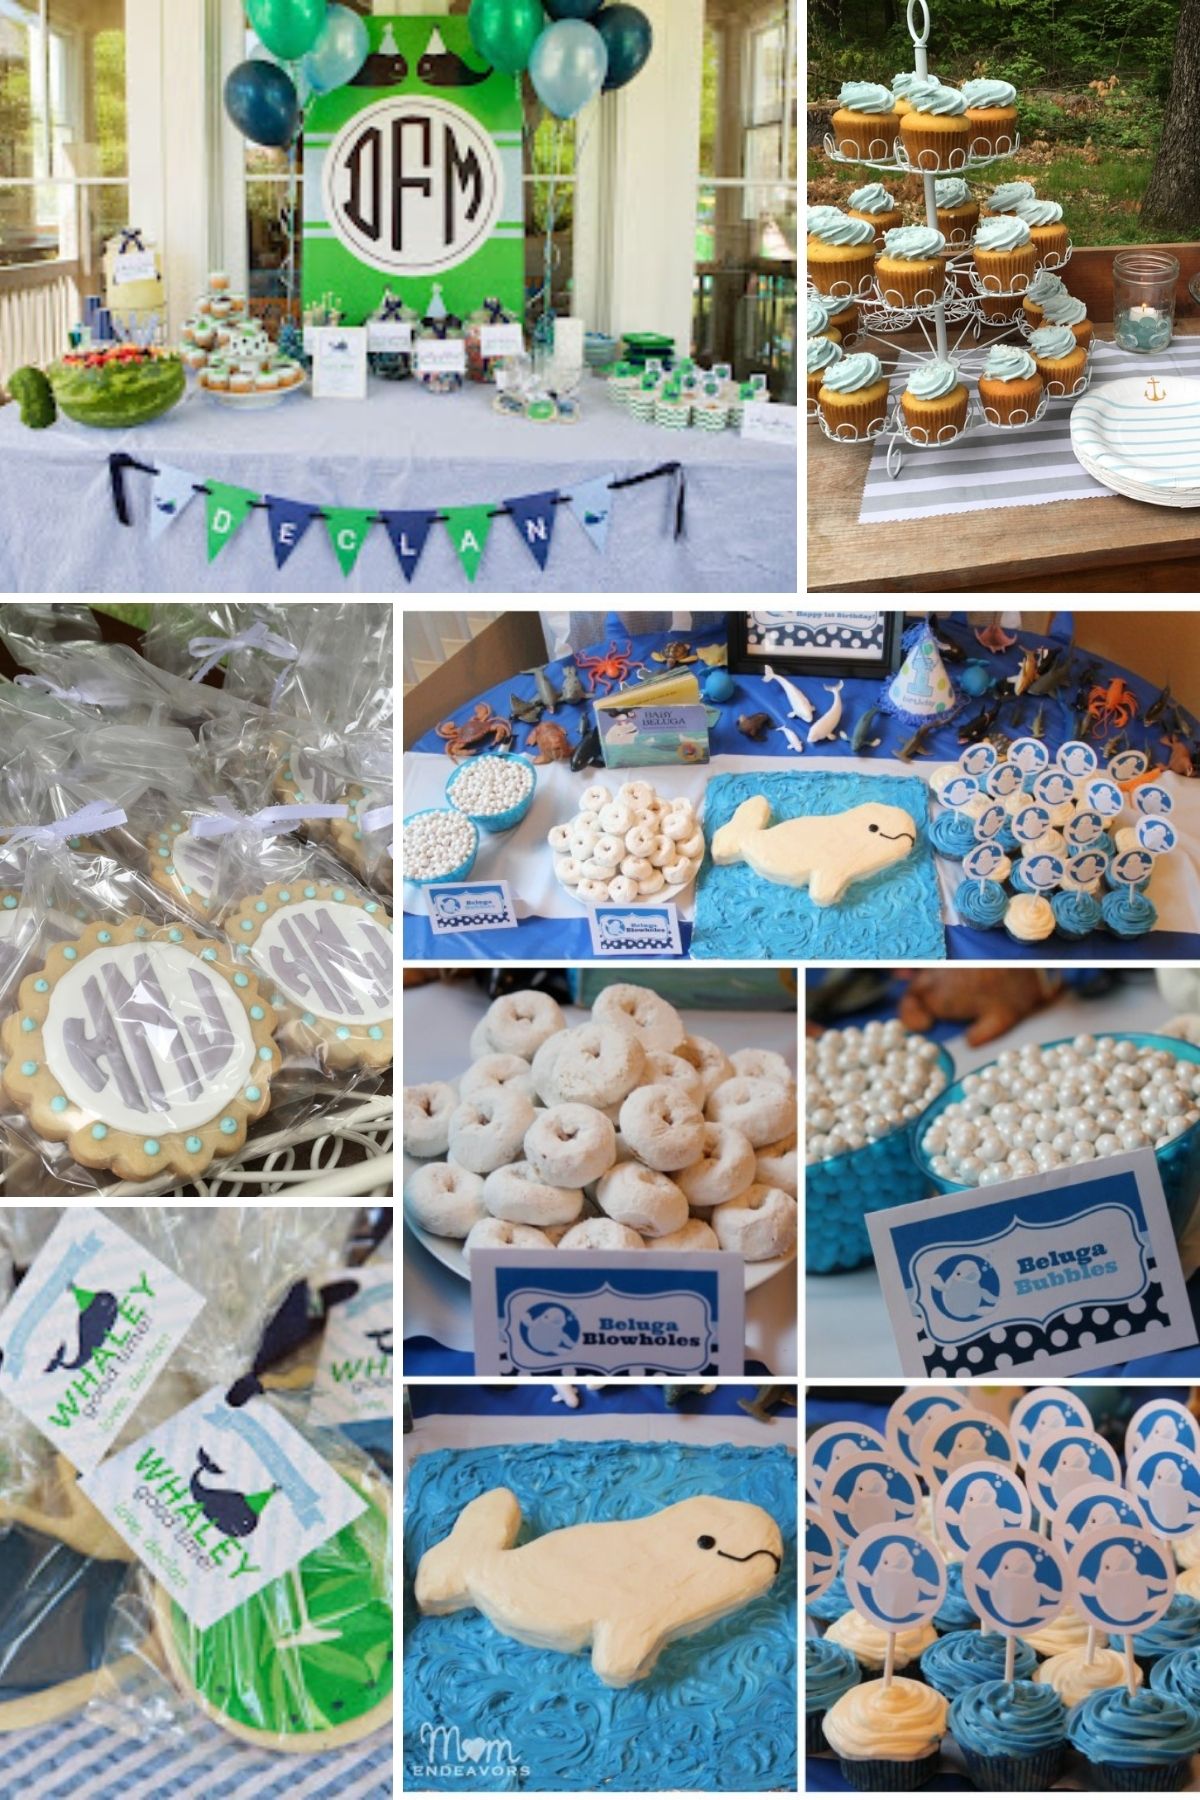 Photo collage from whale themed party with party food, party favors, and decorations.